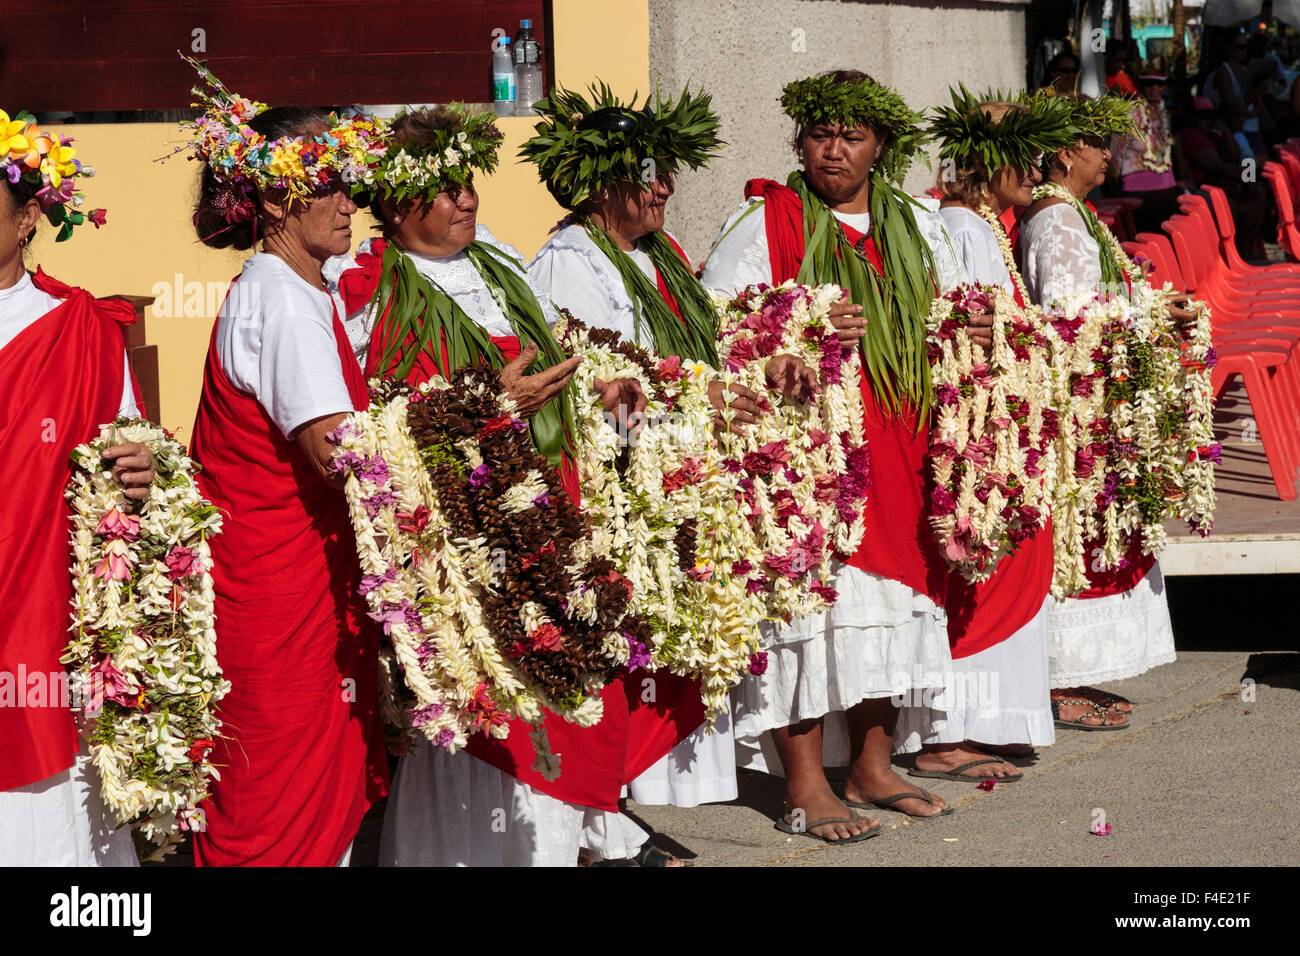 Pacific Ocean, French Polynesia, Society Islands, Huahine, Fare. Local women gathered in traditional dress holding leis for festival-goers. Stock Photo